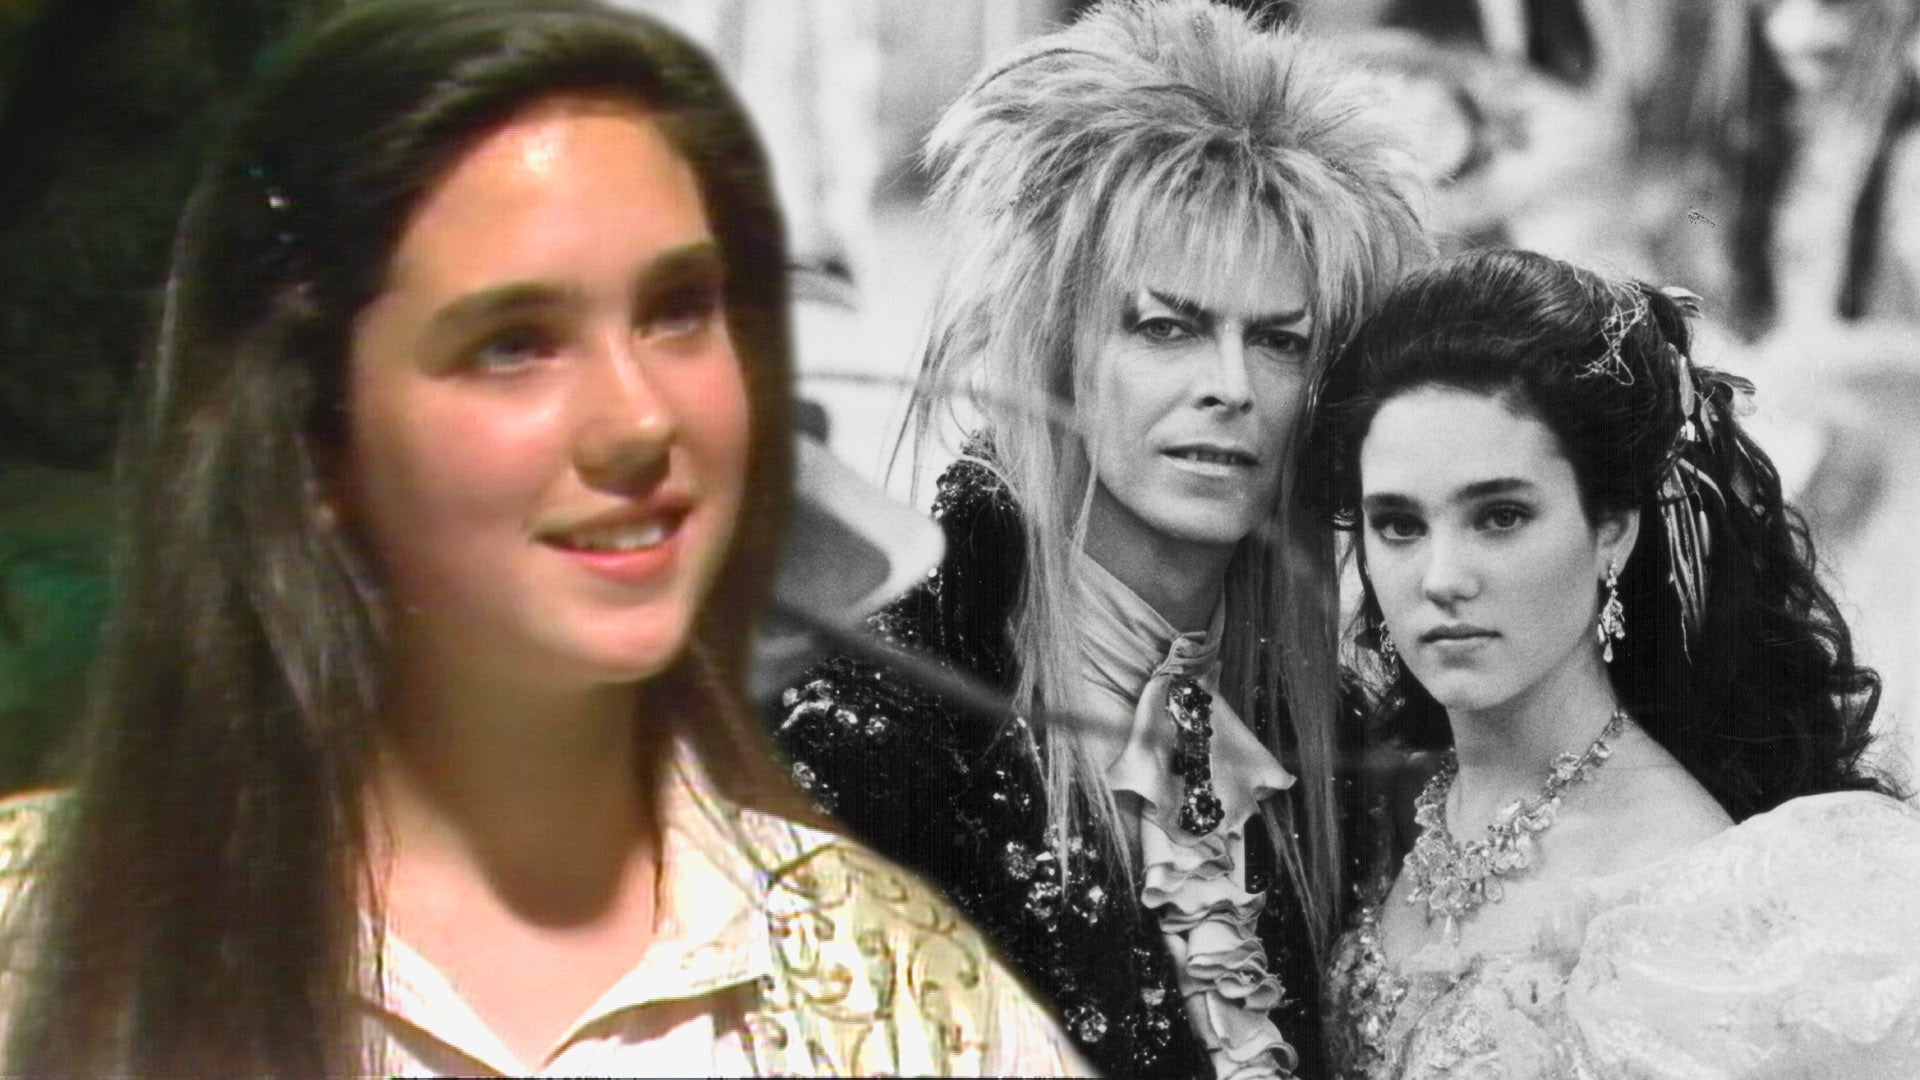 Cosplayer Straight Up Becomes Labyrinth's Jennifer Connelly